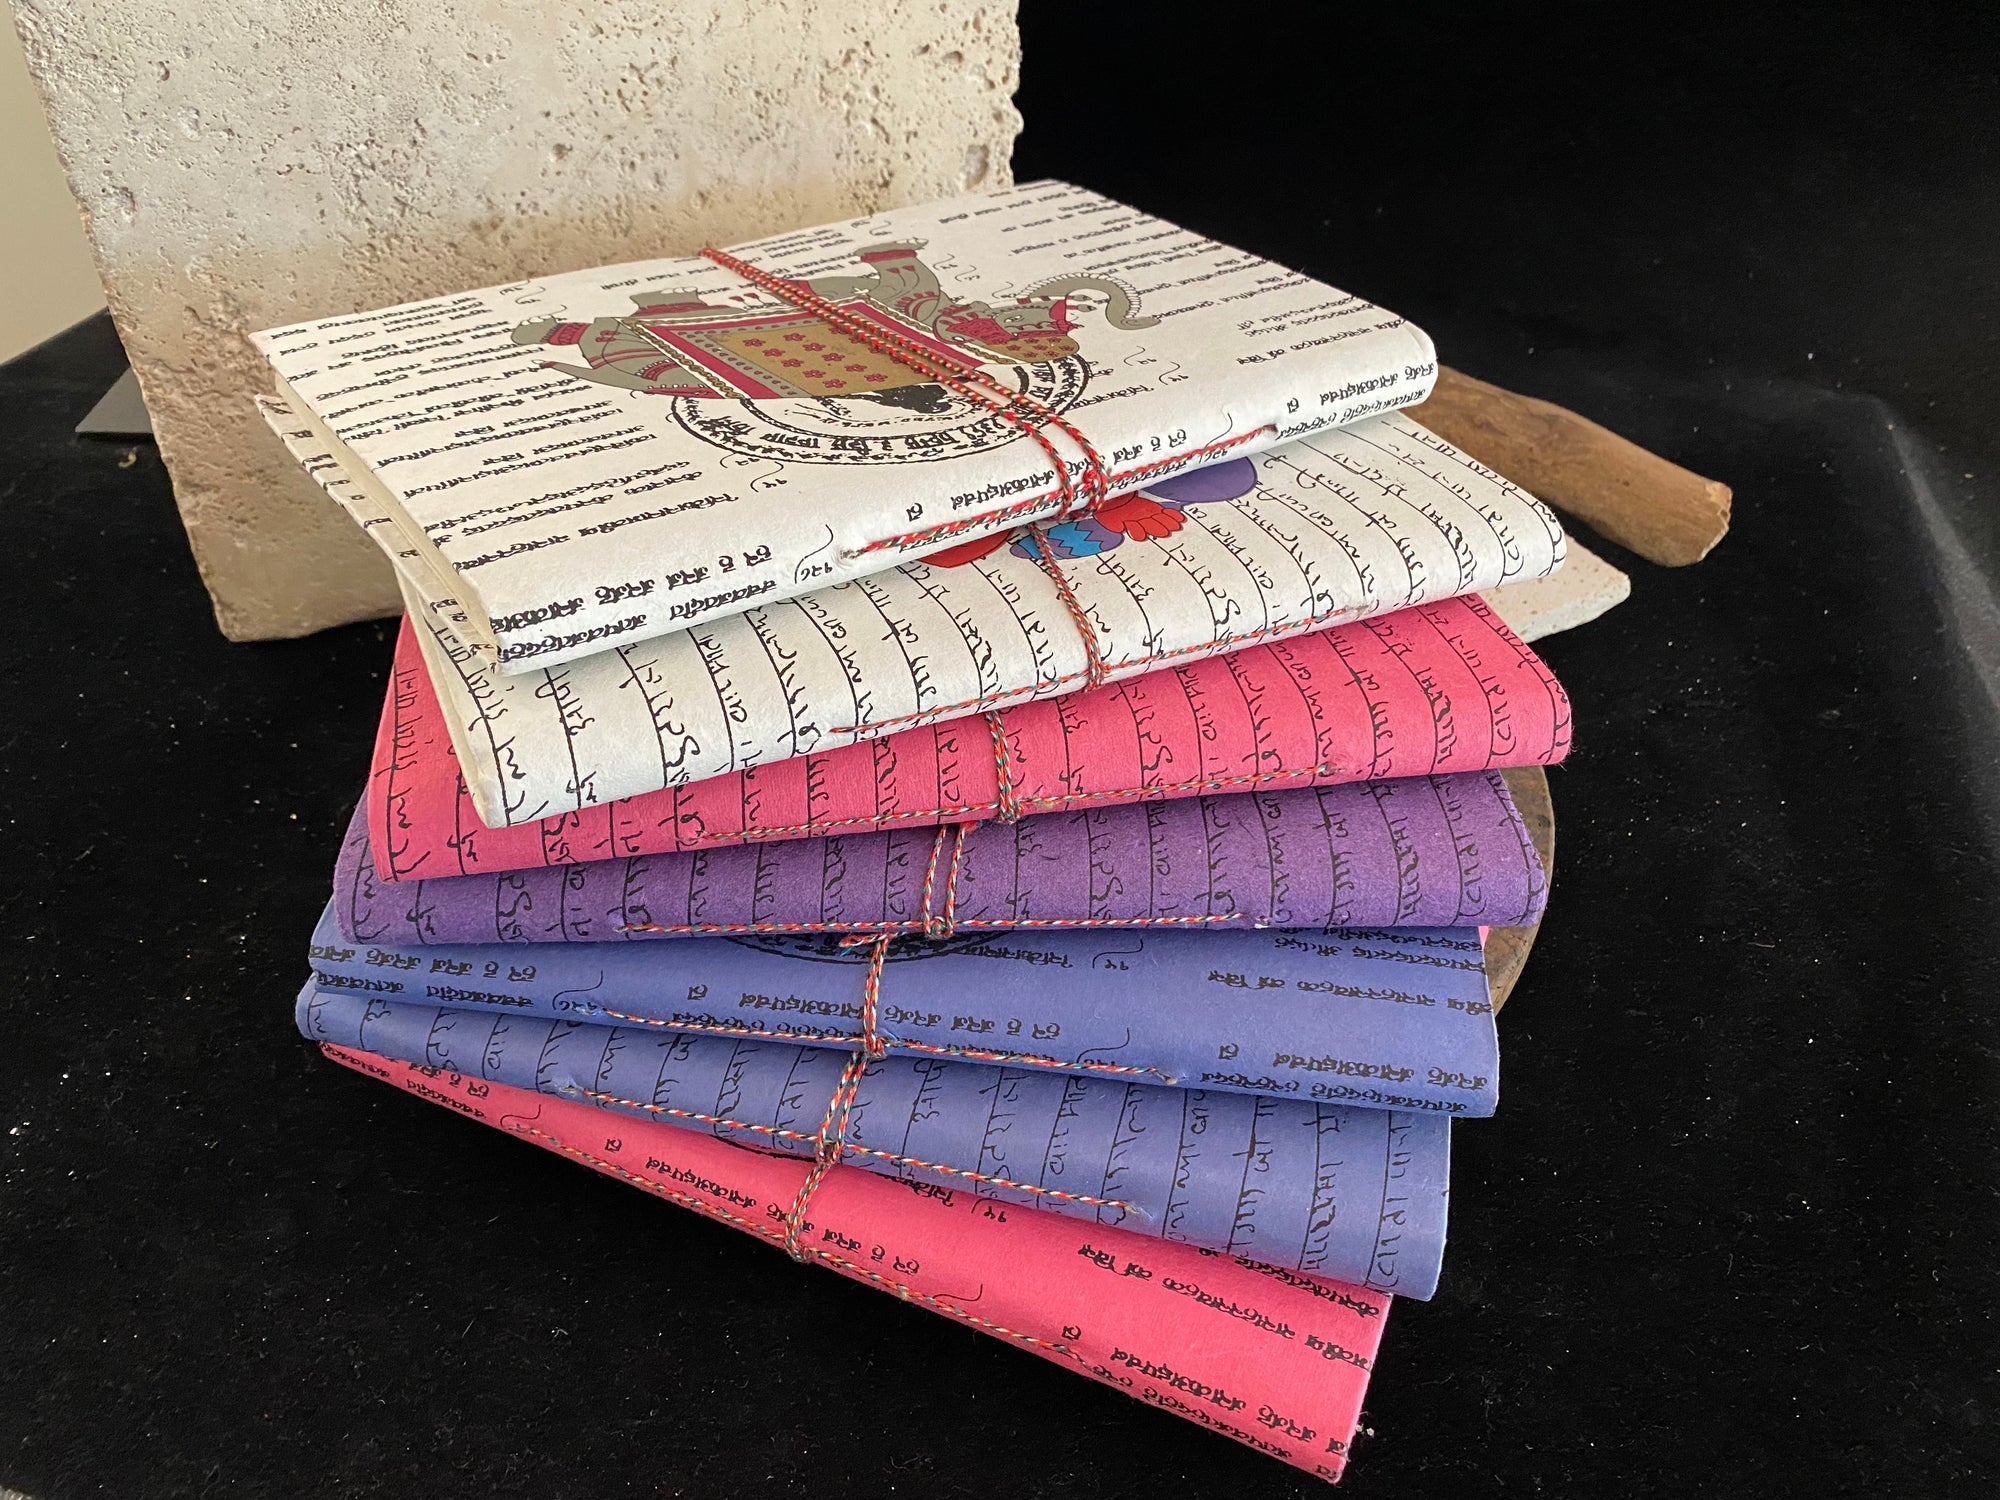 Eco-friendly journals, the perfect size at 25 x 17 cm (10 x 6.75"). Filled with handmade recycled paper and covered in bright, printed covers. Excellent for use as a journal, writer's notebook, scrapbook, travel diary or notebook.